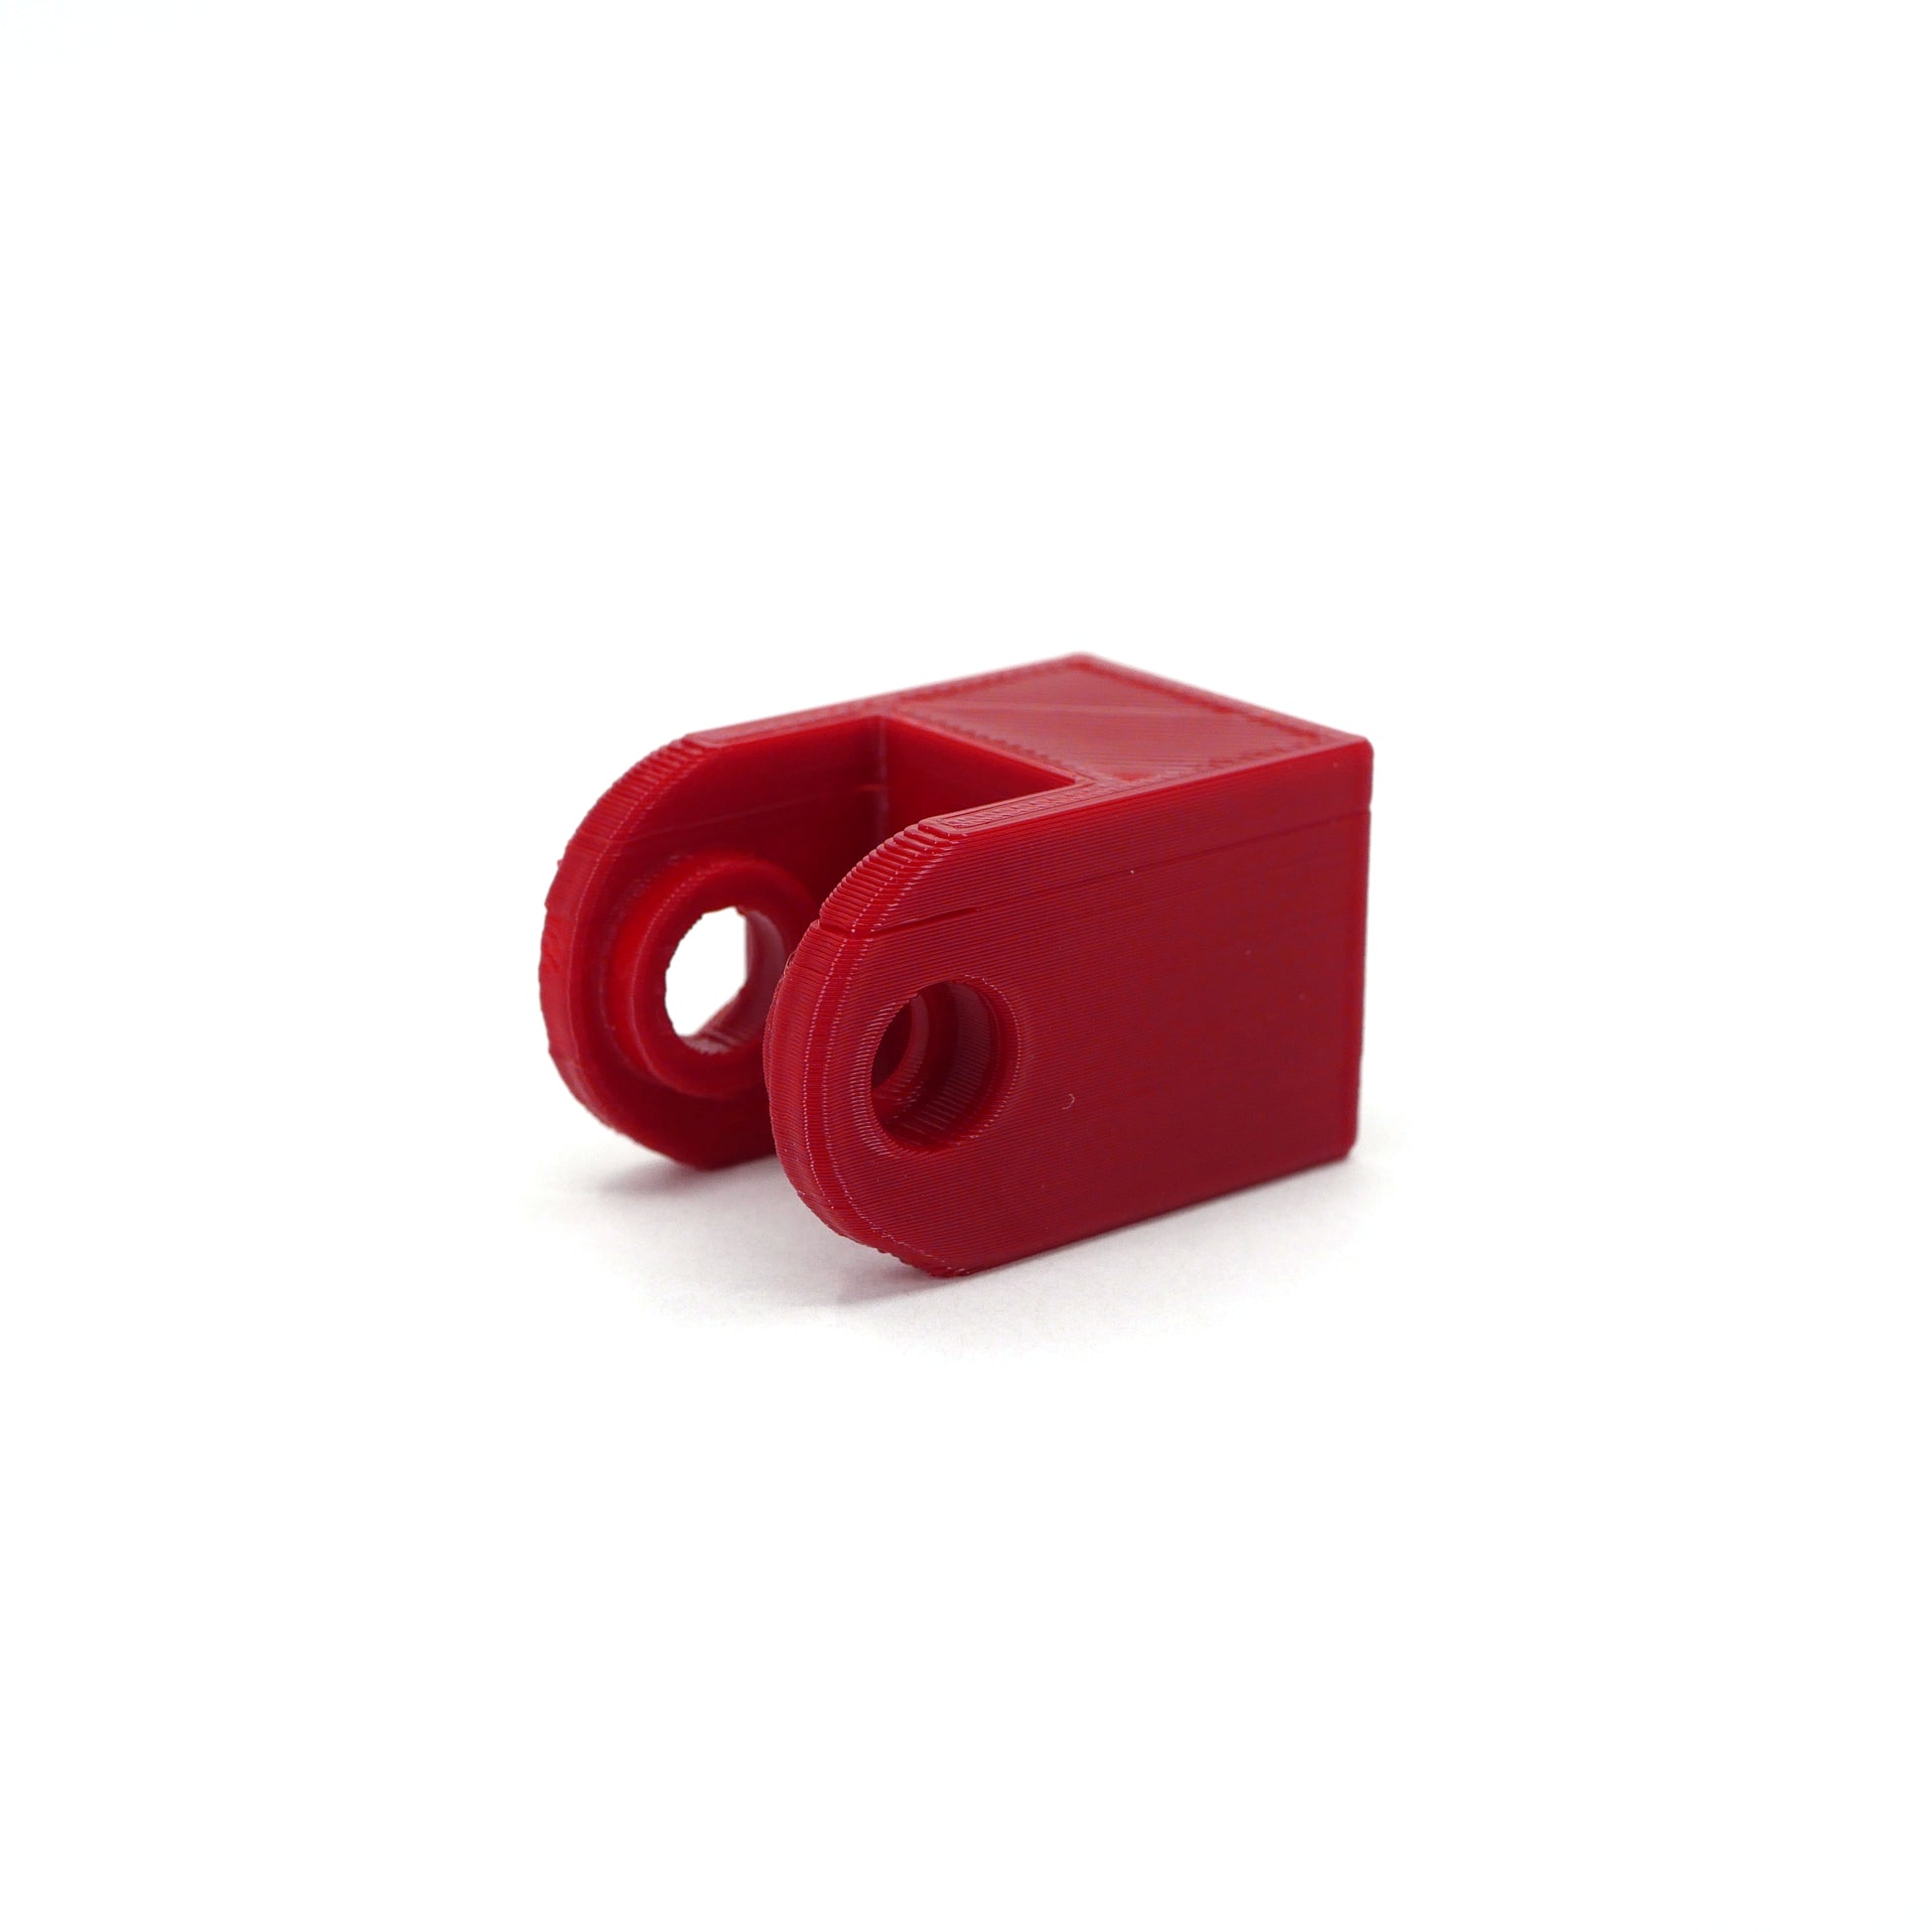 A red HyperX DuoCast microphone mount adapter.